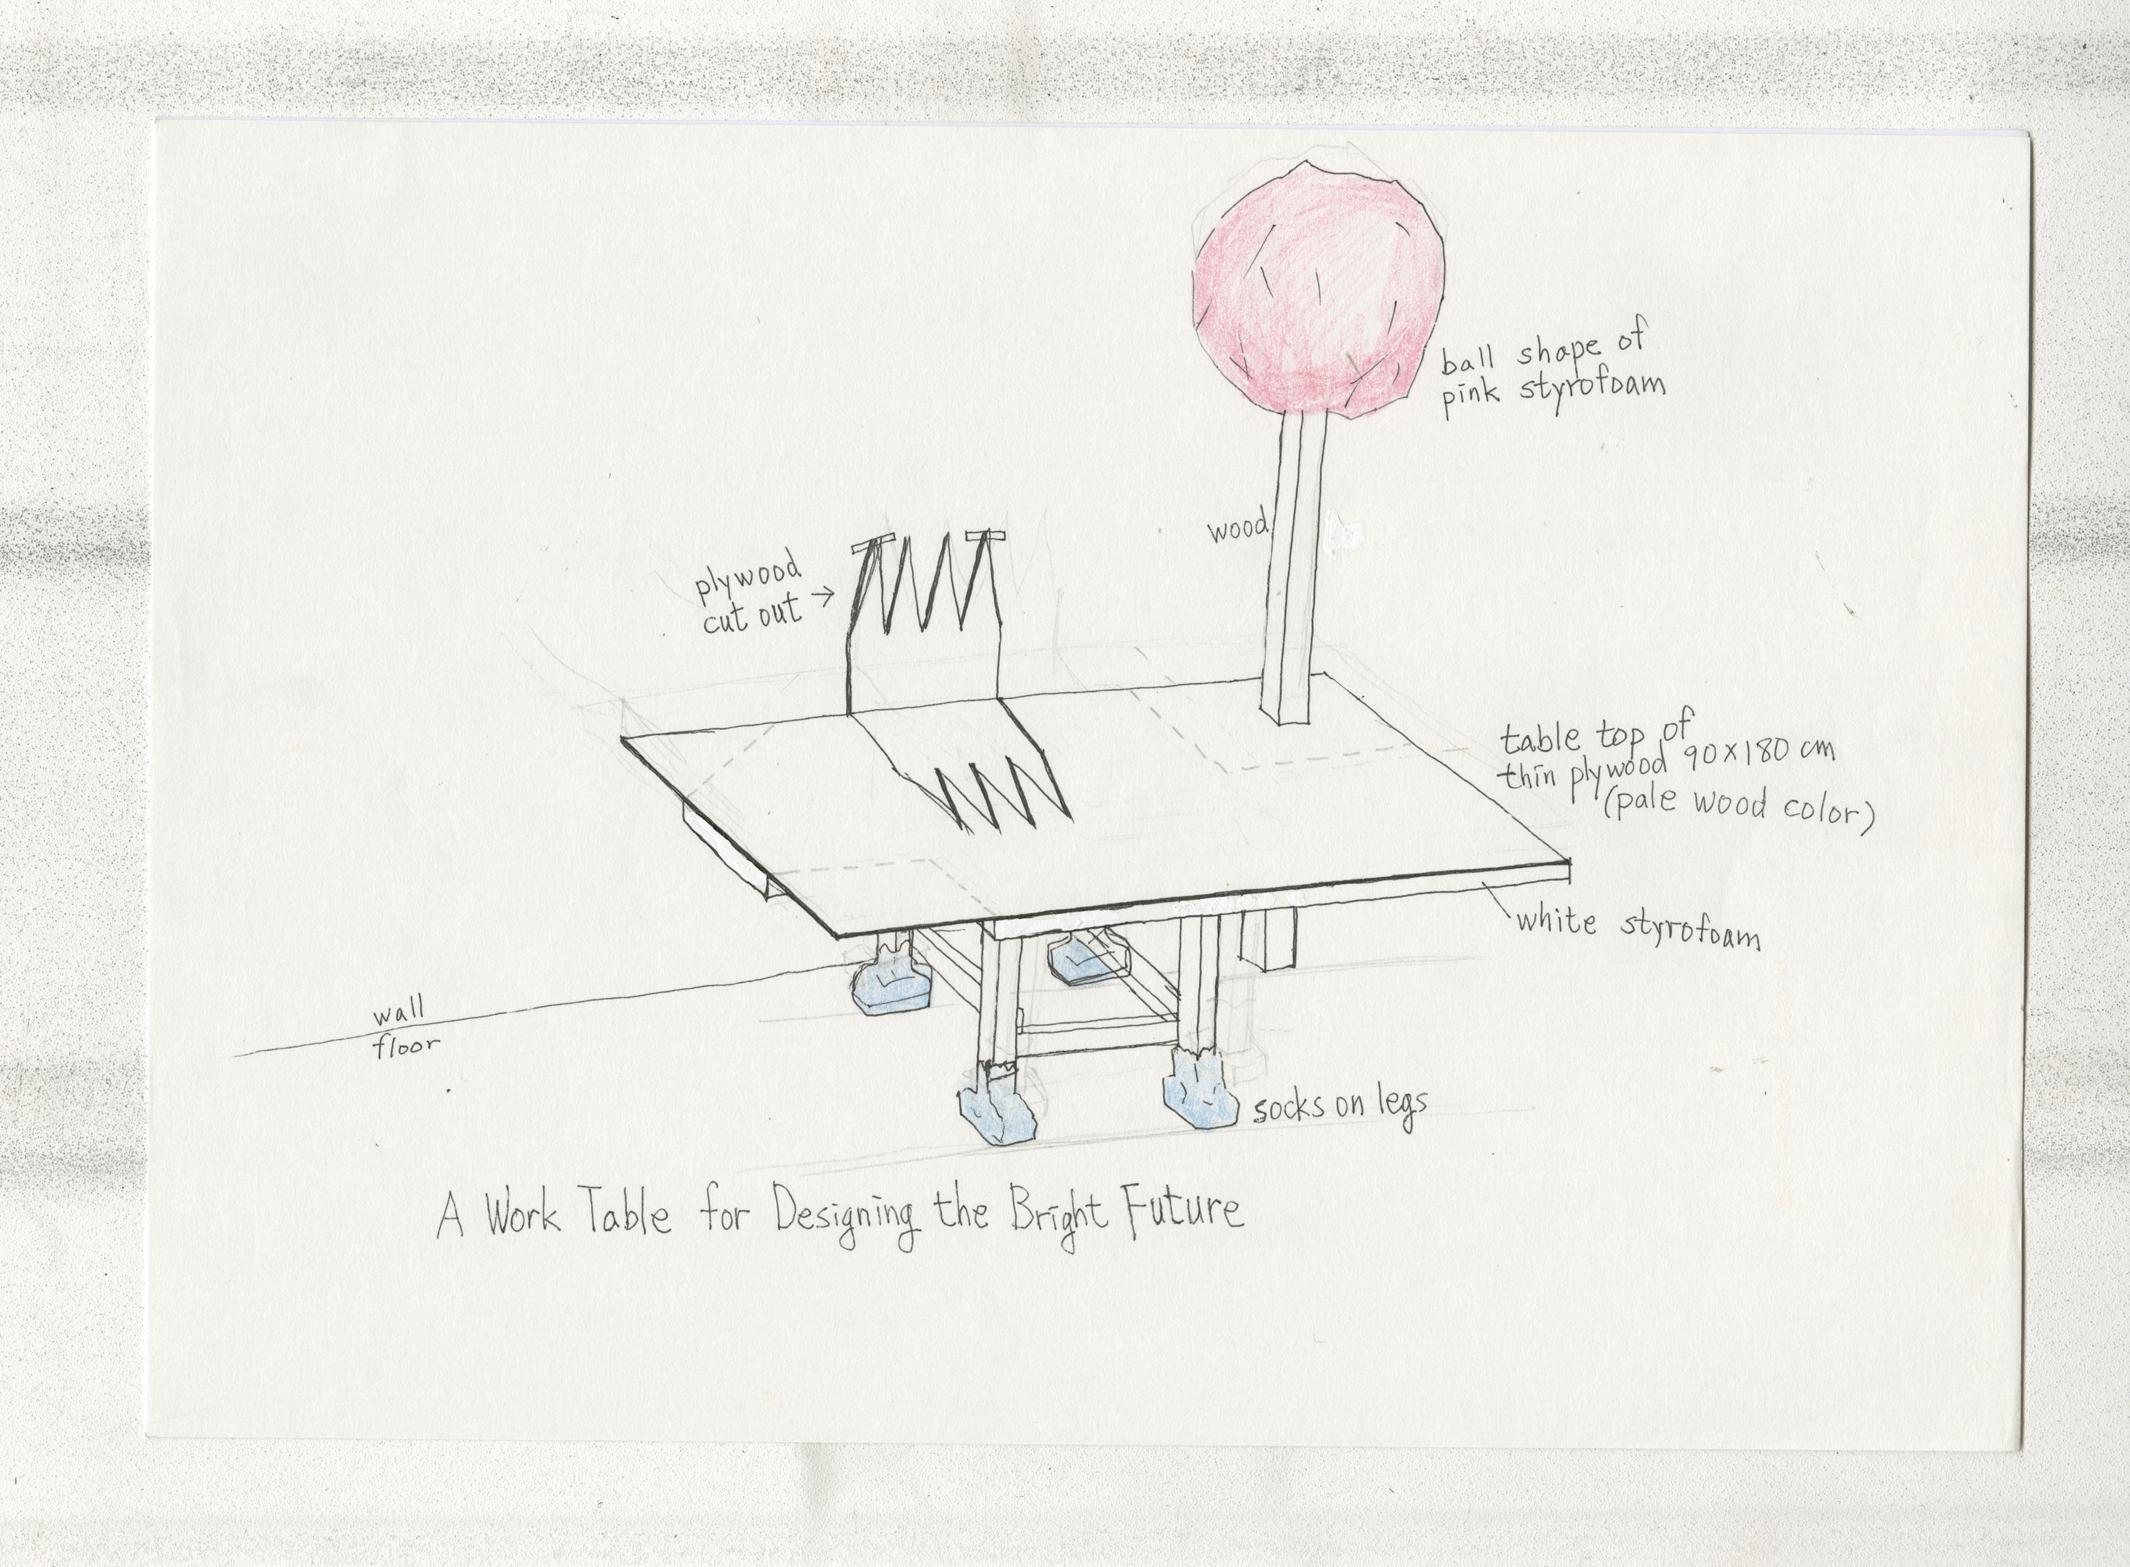 5. Yiso Bahc, A Worktable for Designing the Bright Future, installation, 2000